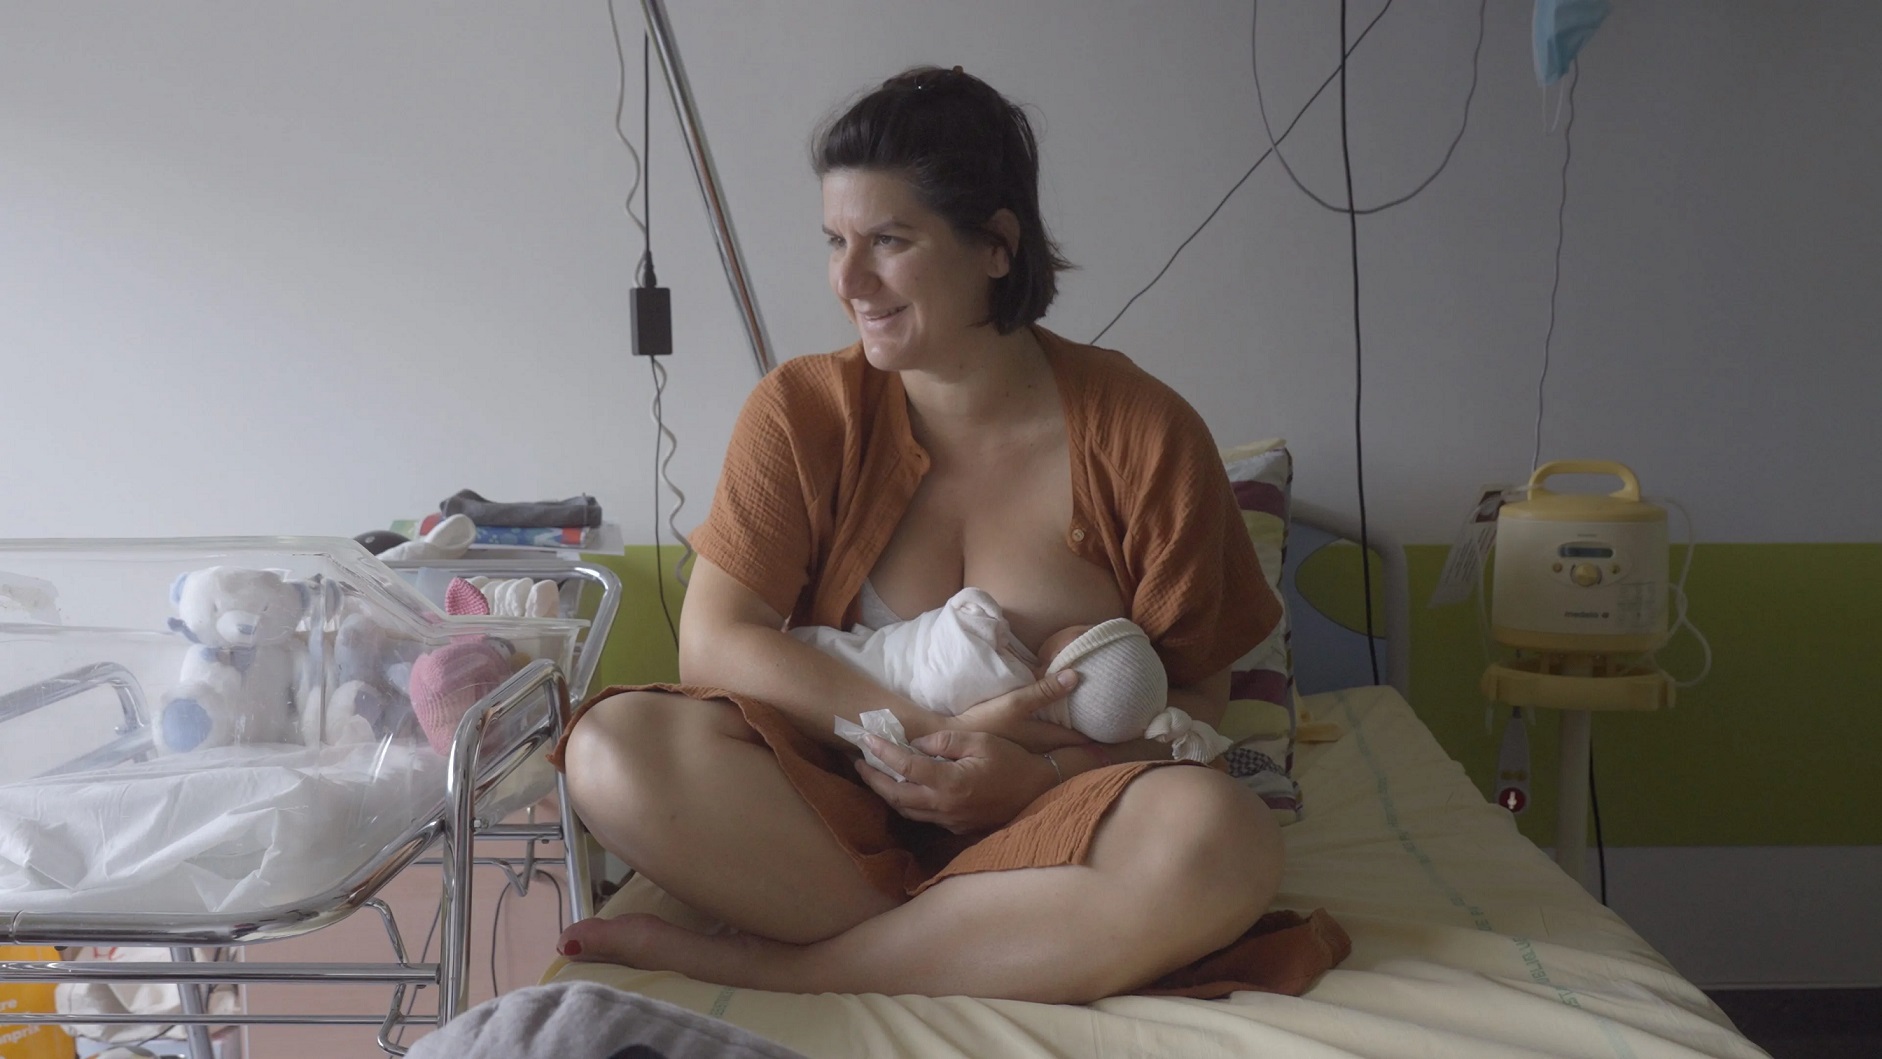 Claire Simon’s Gynecological Ward Doc “Our Body” Acquired by Cinema Guild – NewsEverything Hollywood